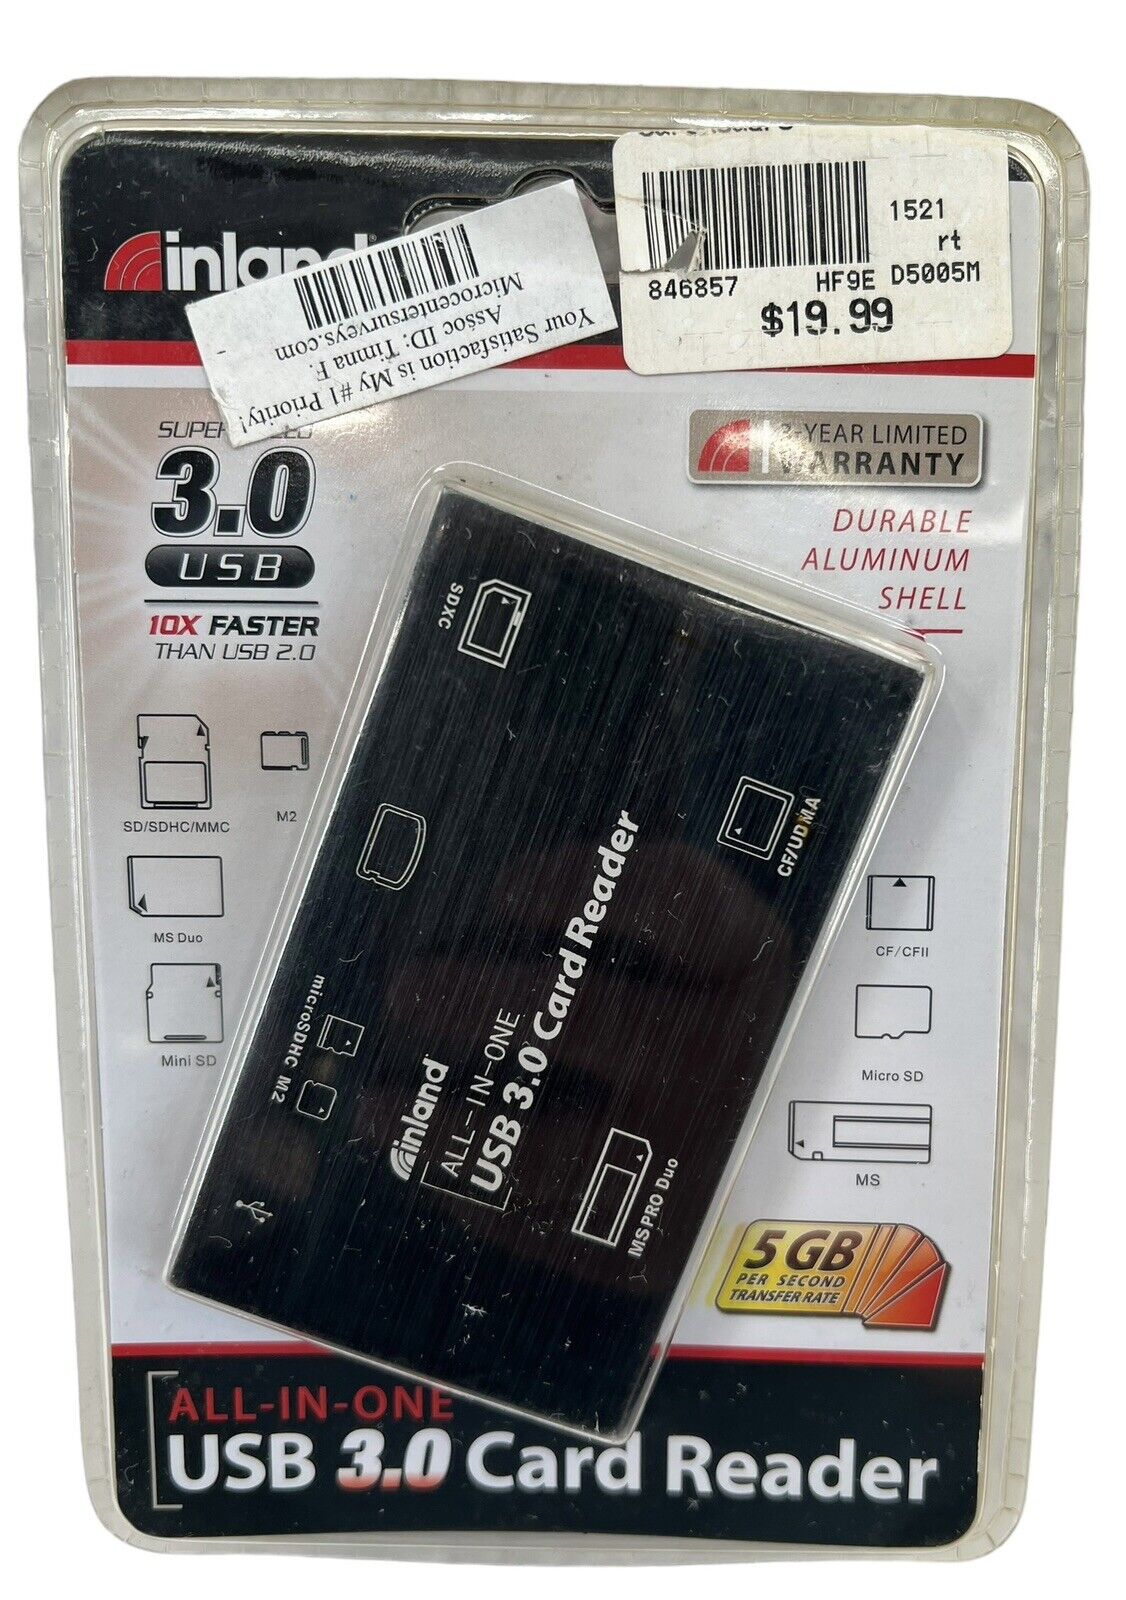 Inland All-in-One Super Speed USB 3.0 Card Reader *SEALED*